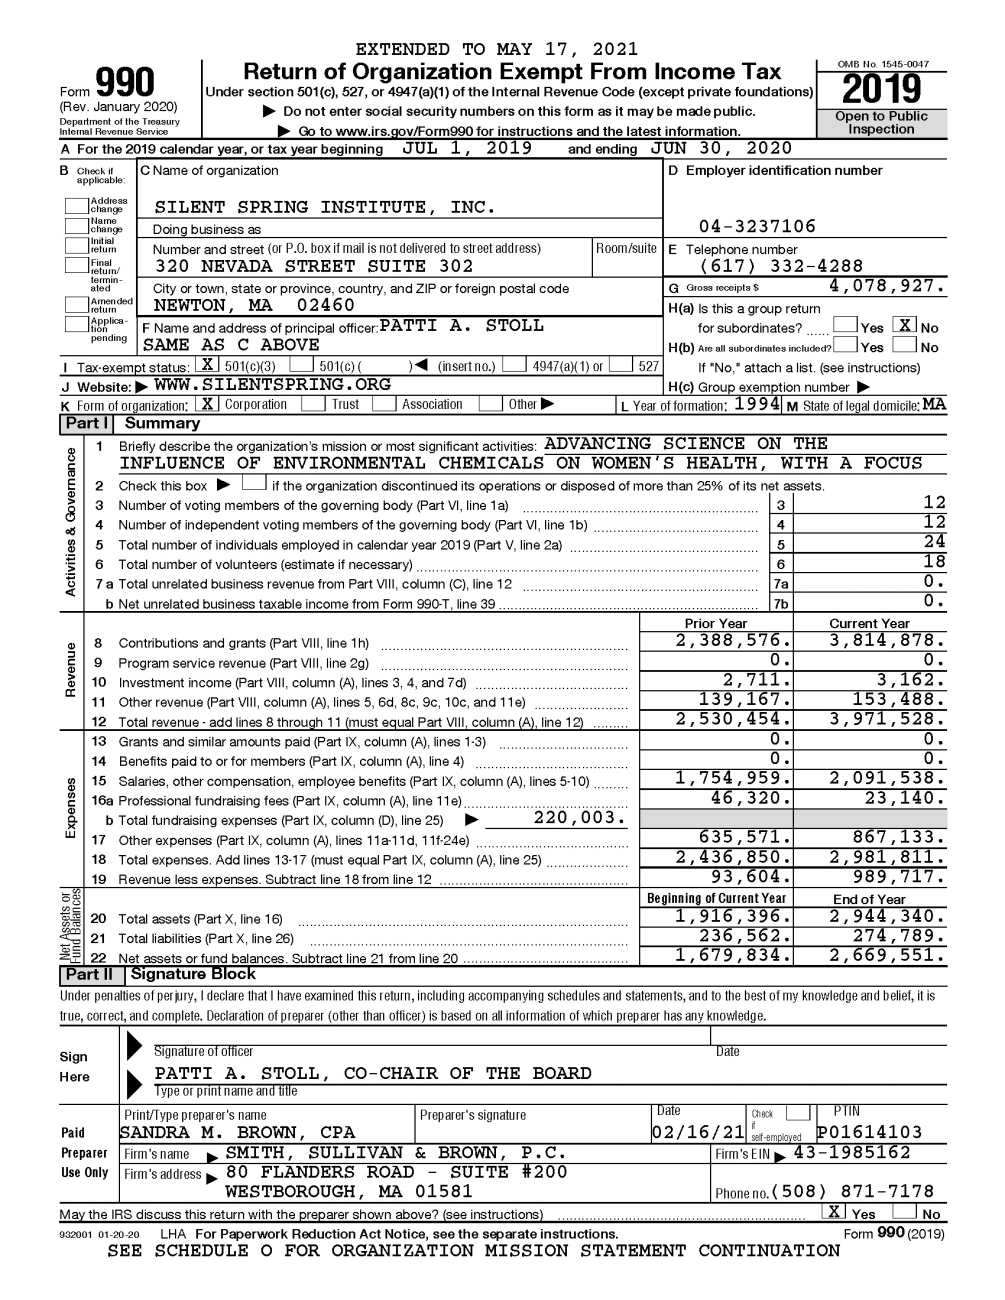 2019 IRS Form 990 (FY20)